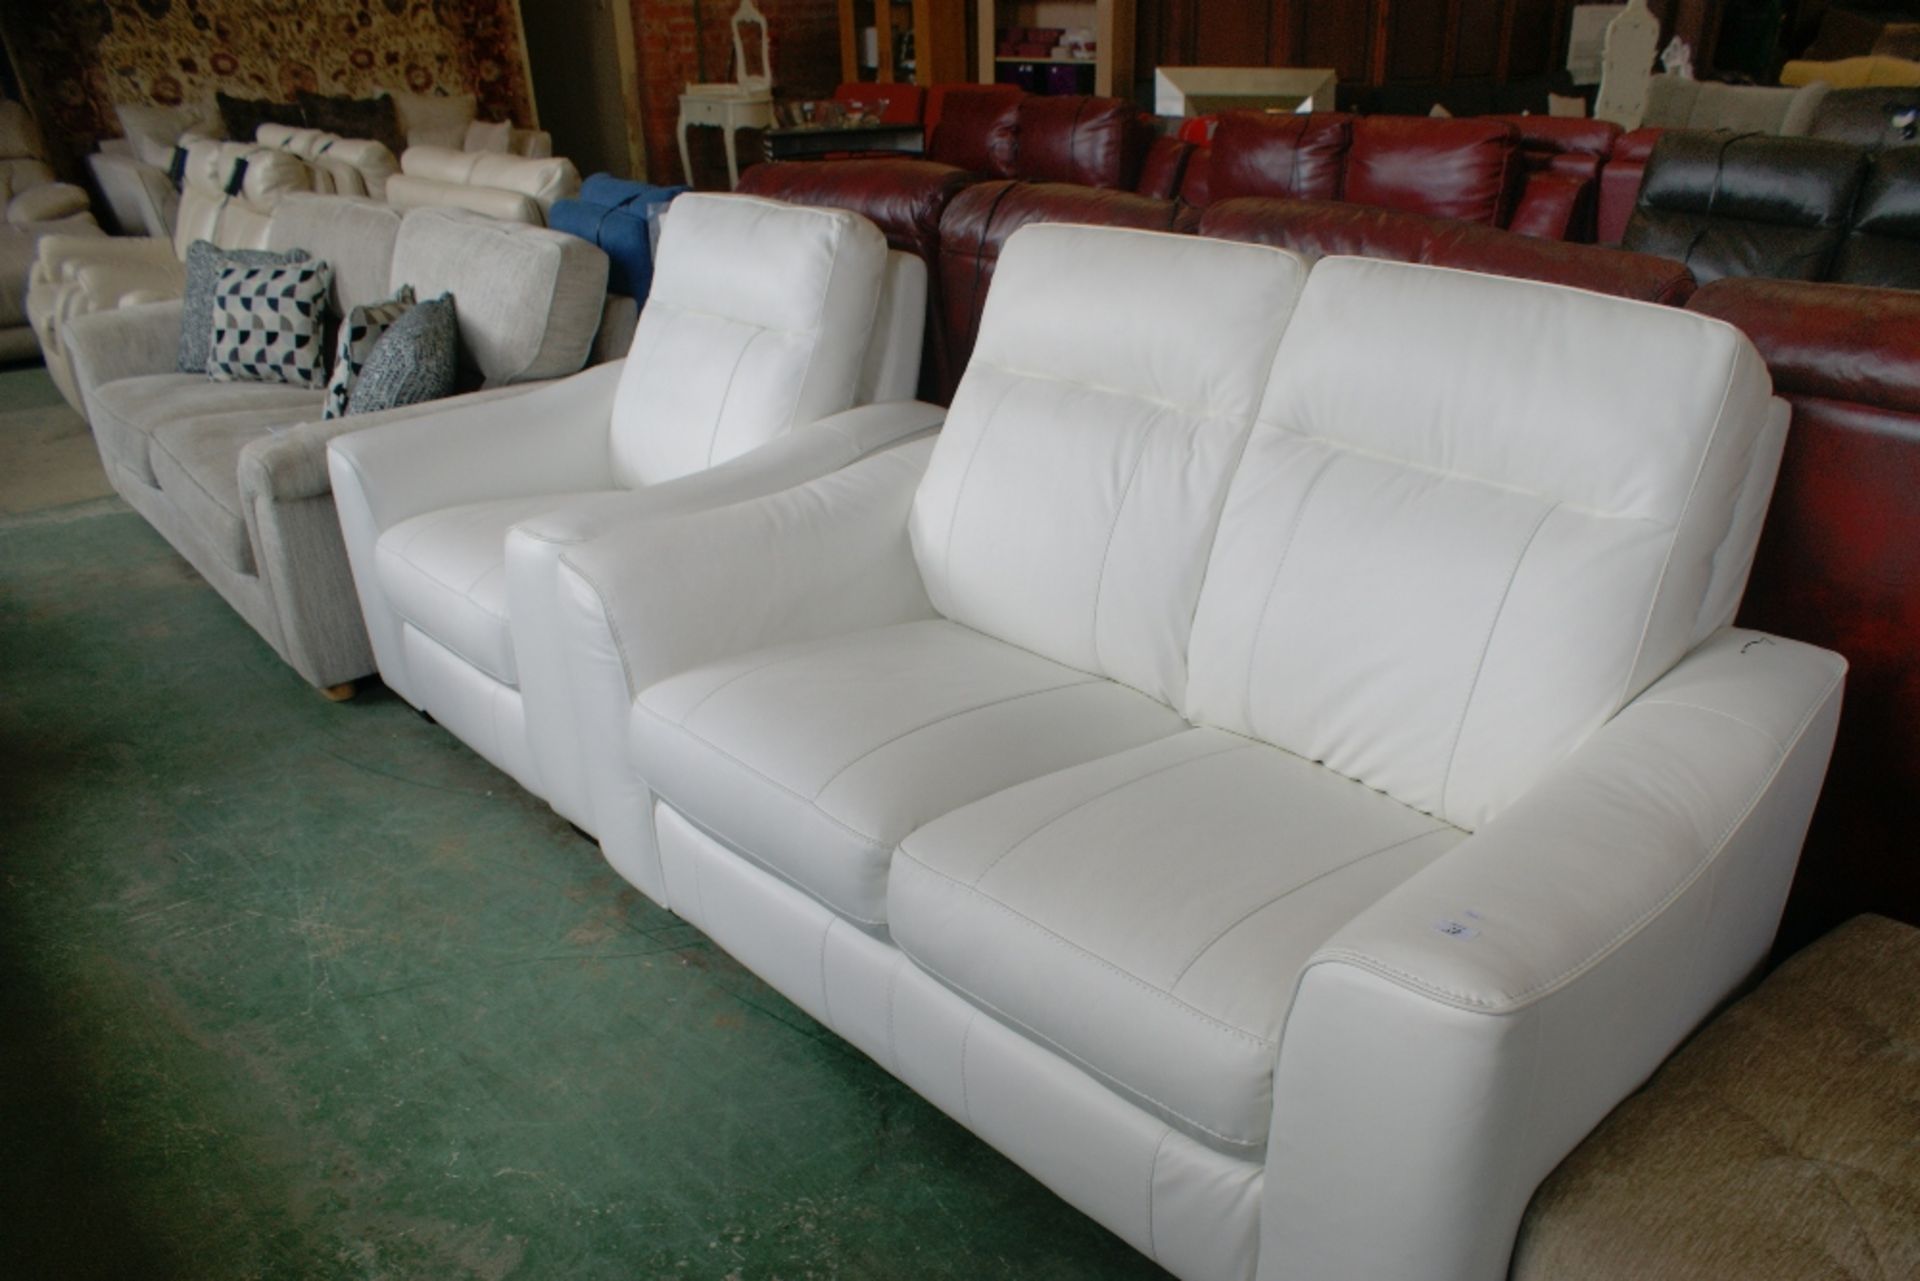 WHITE LEATHER 2 SEATER SOFA AND CHAIR (1)